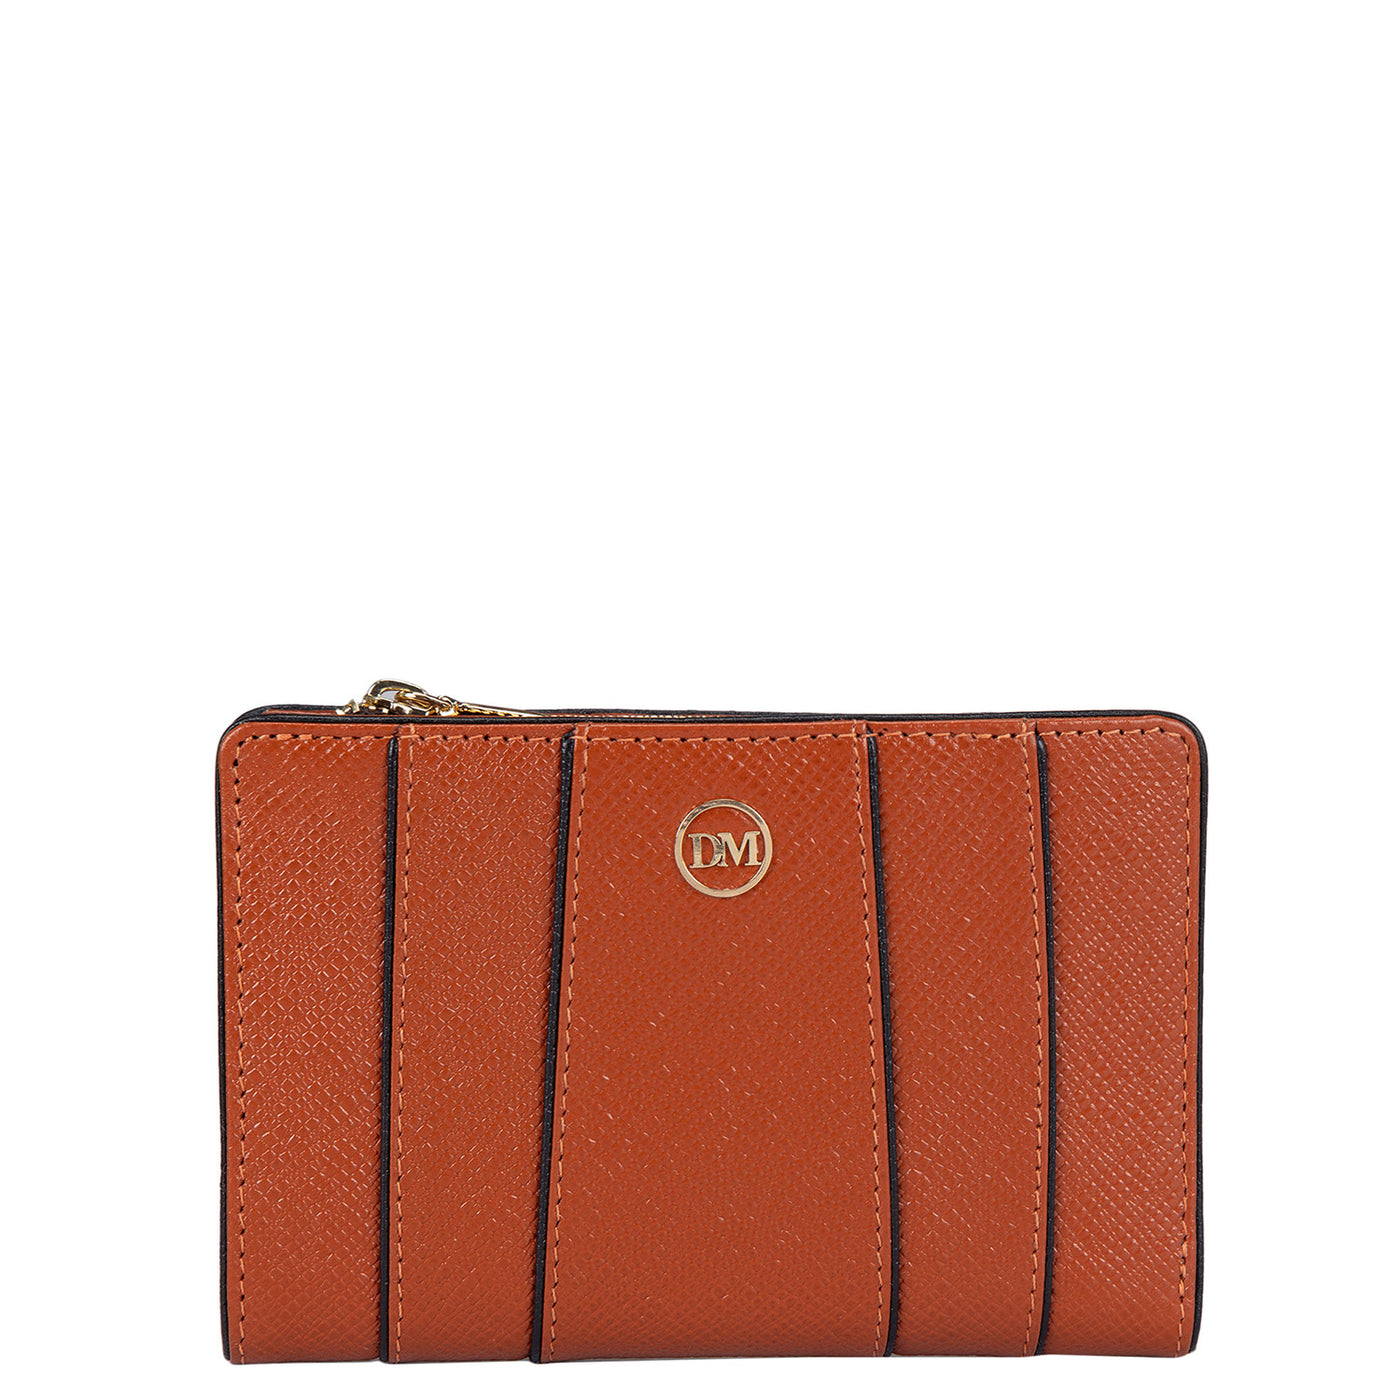 Franzy Leather Ladies Wallet - Rust